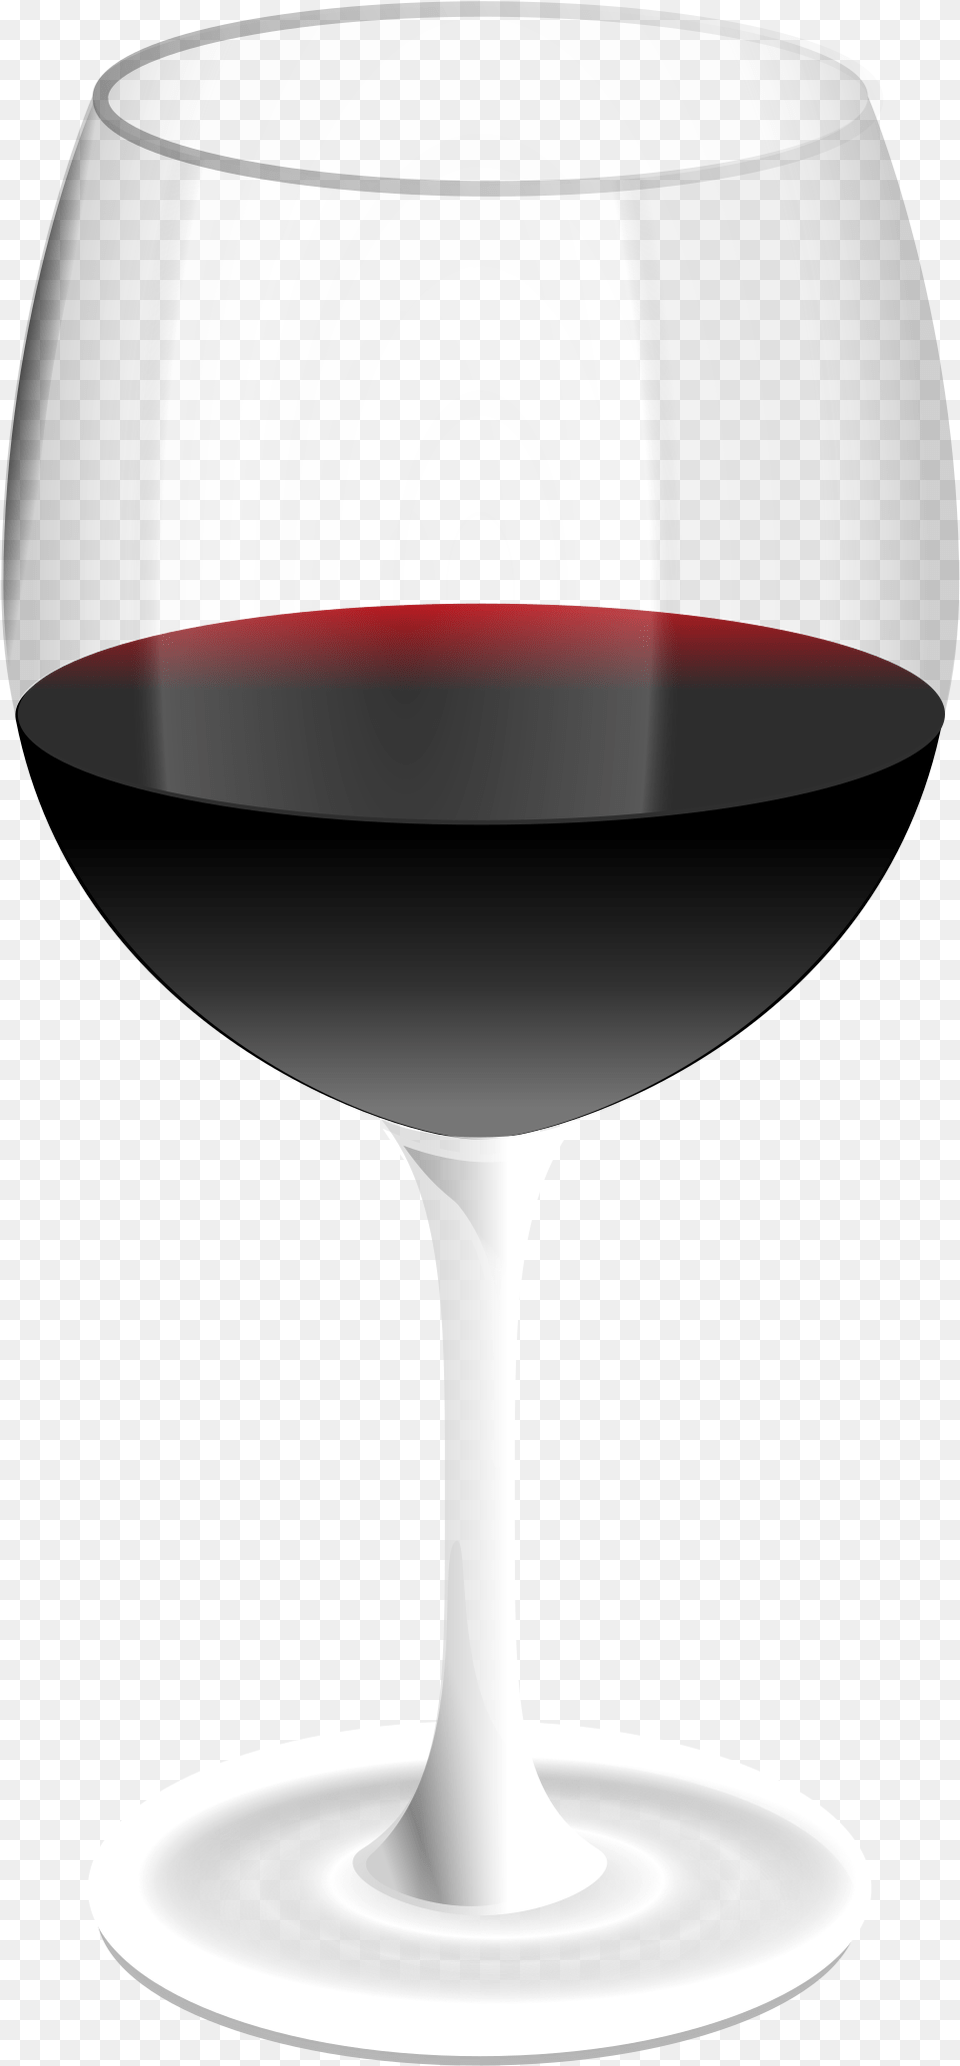 Glass Of Wine Pdf, Alcohol, Beverage, Liquor, Red Wine Png